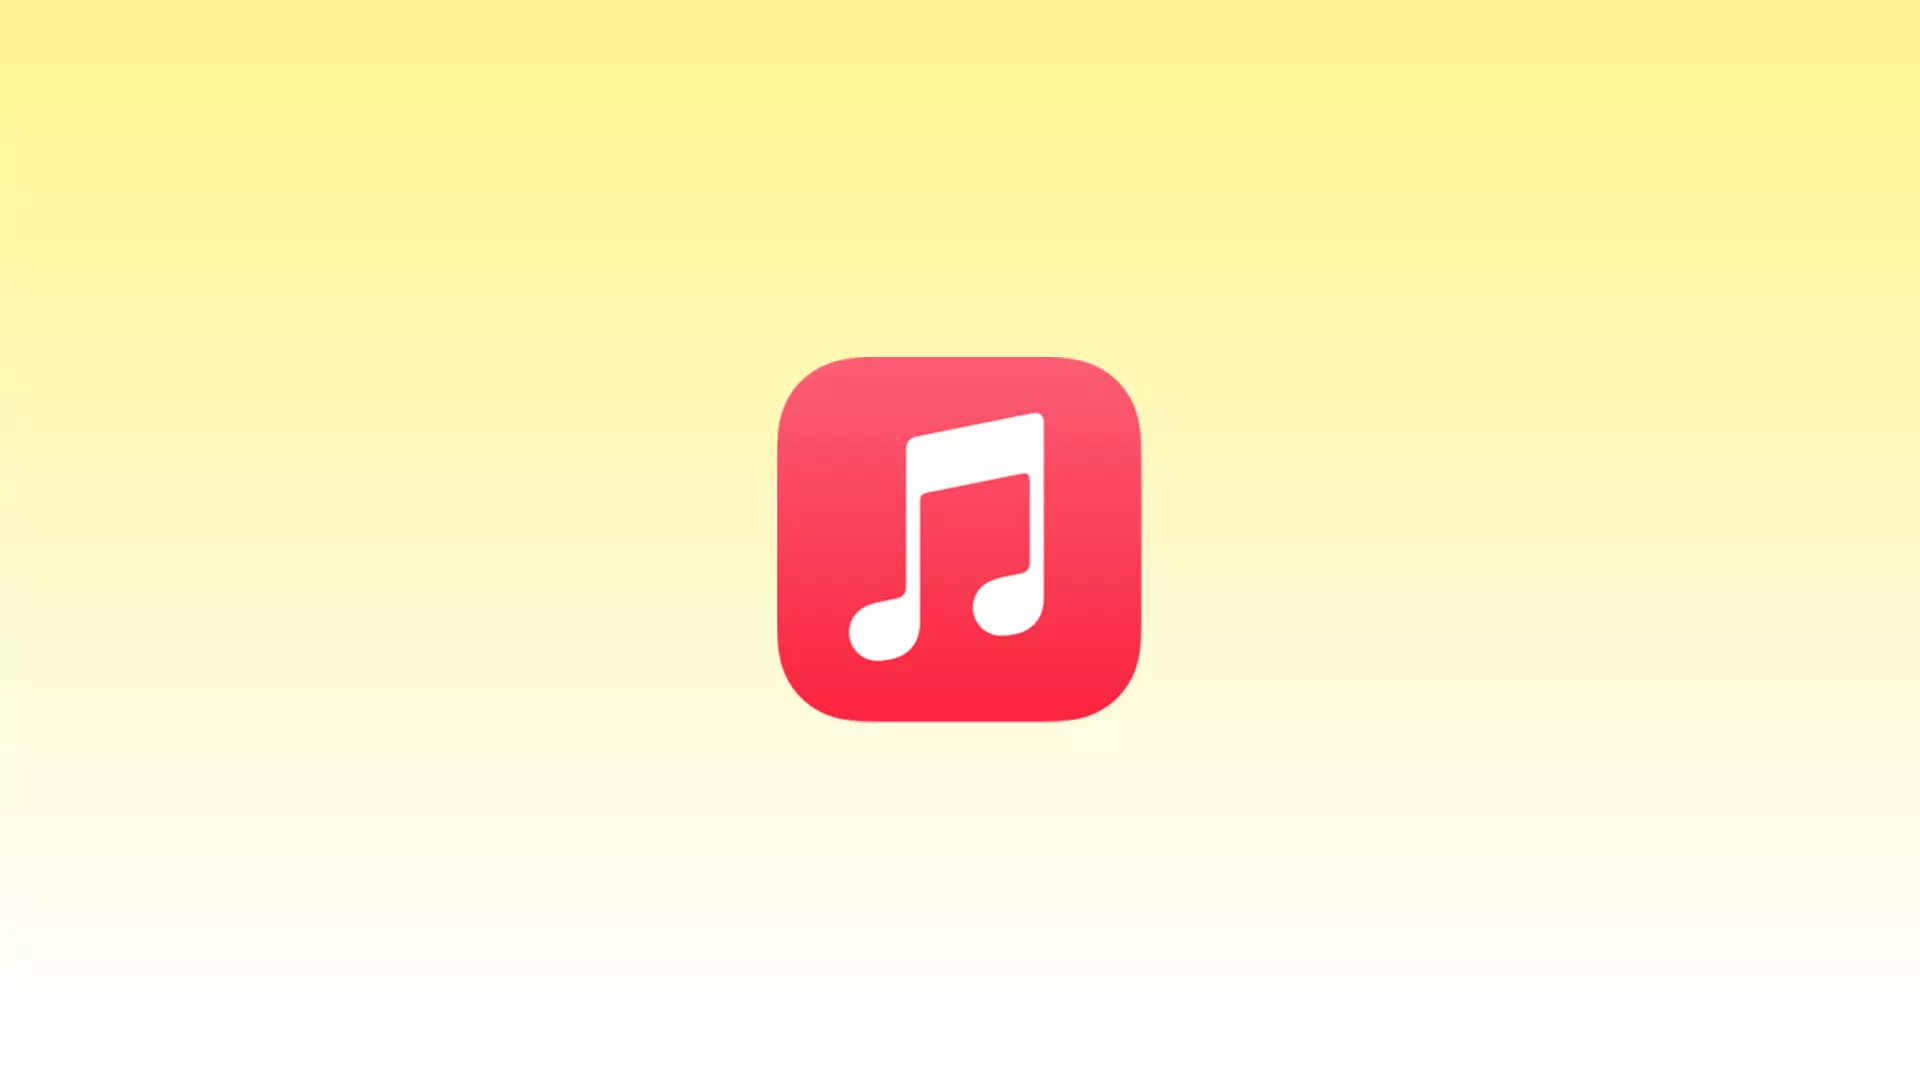 More than 100 million songs are now available on Apple Music